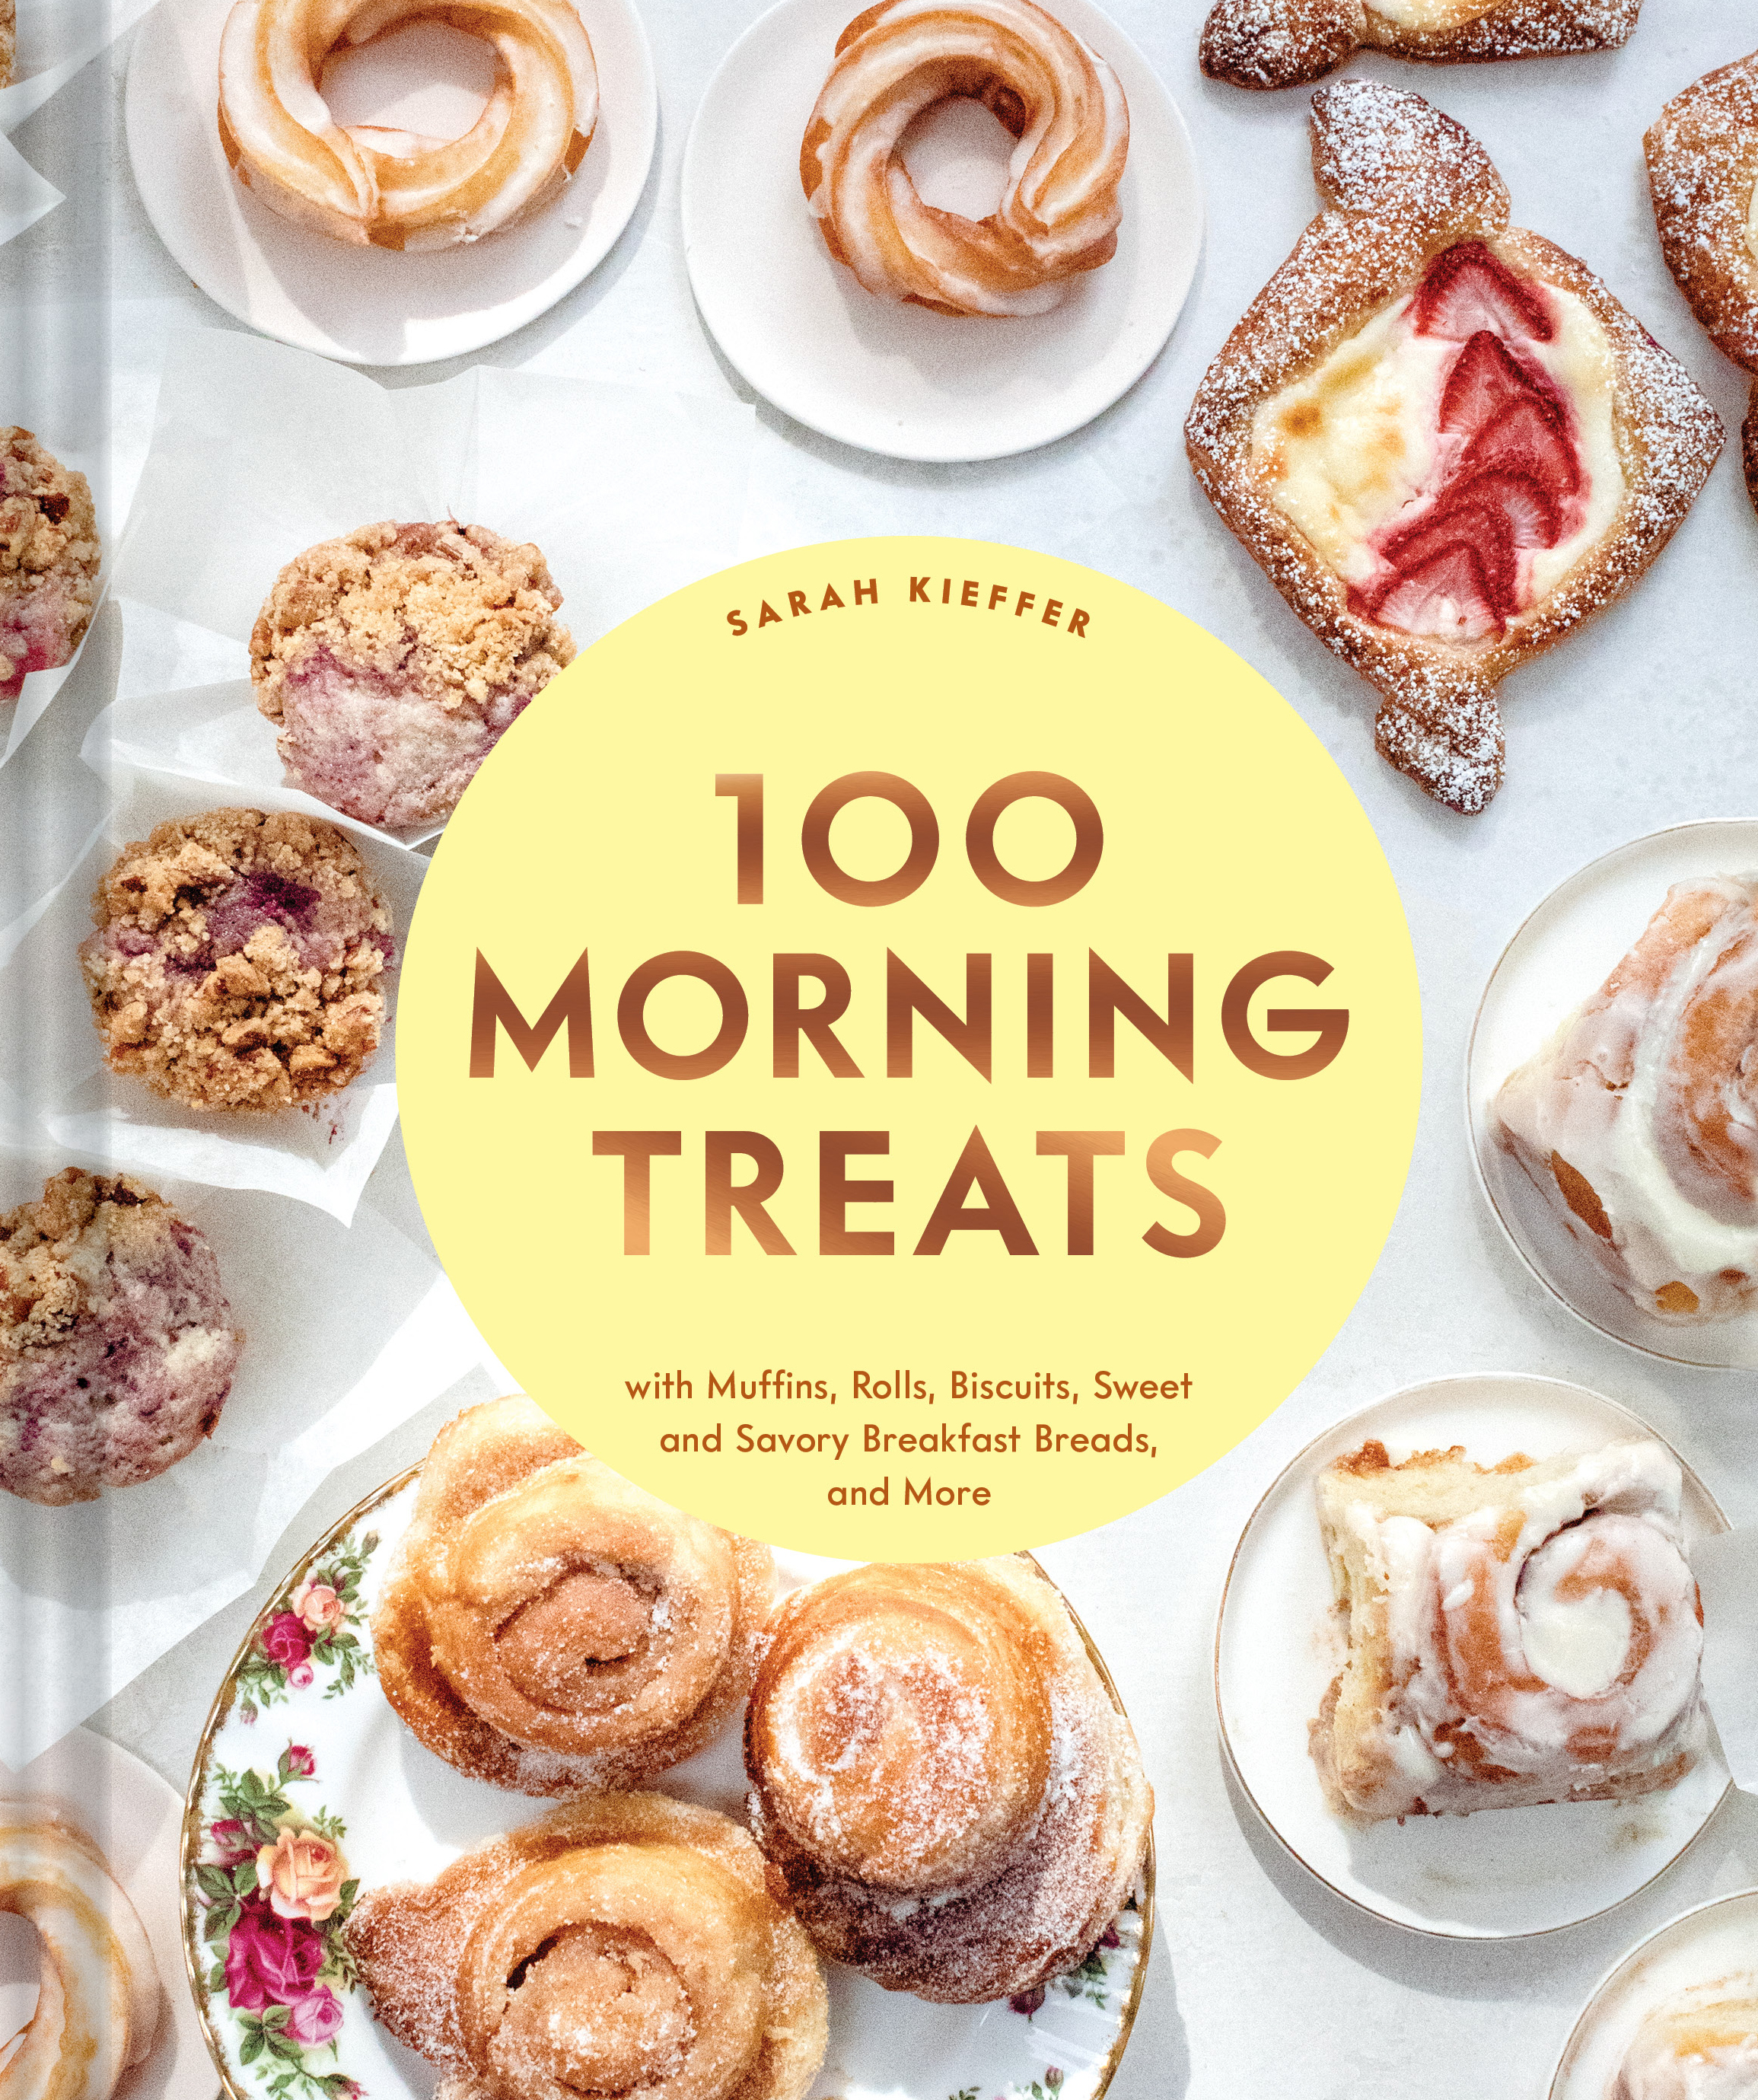 100 Morning Treats : With Muffins, Rolls, Biscuits, Sweet and Savory Breakfast Breads, and More